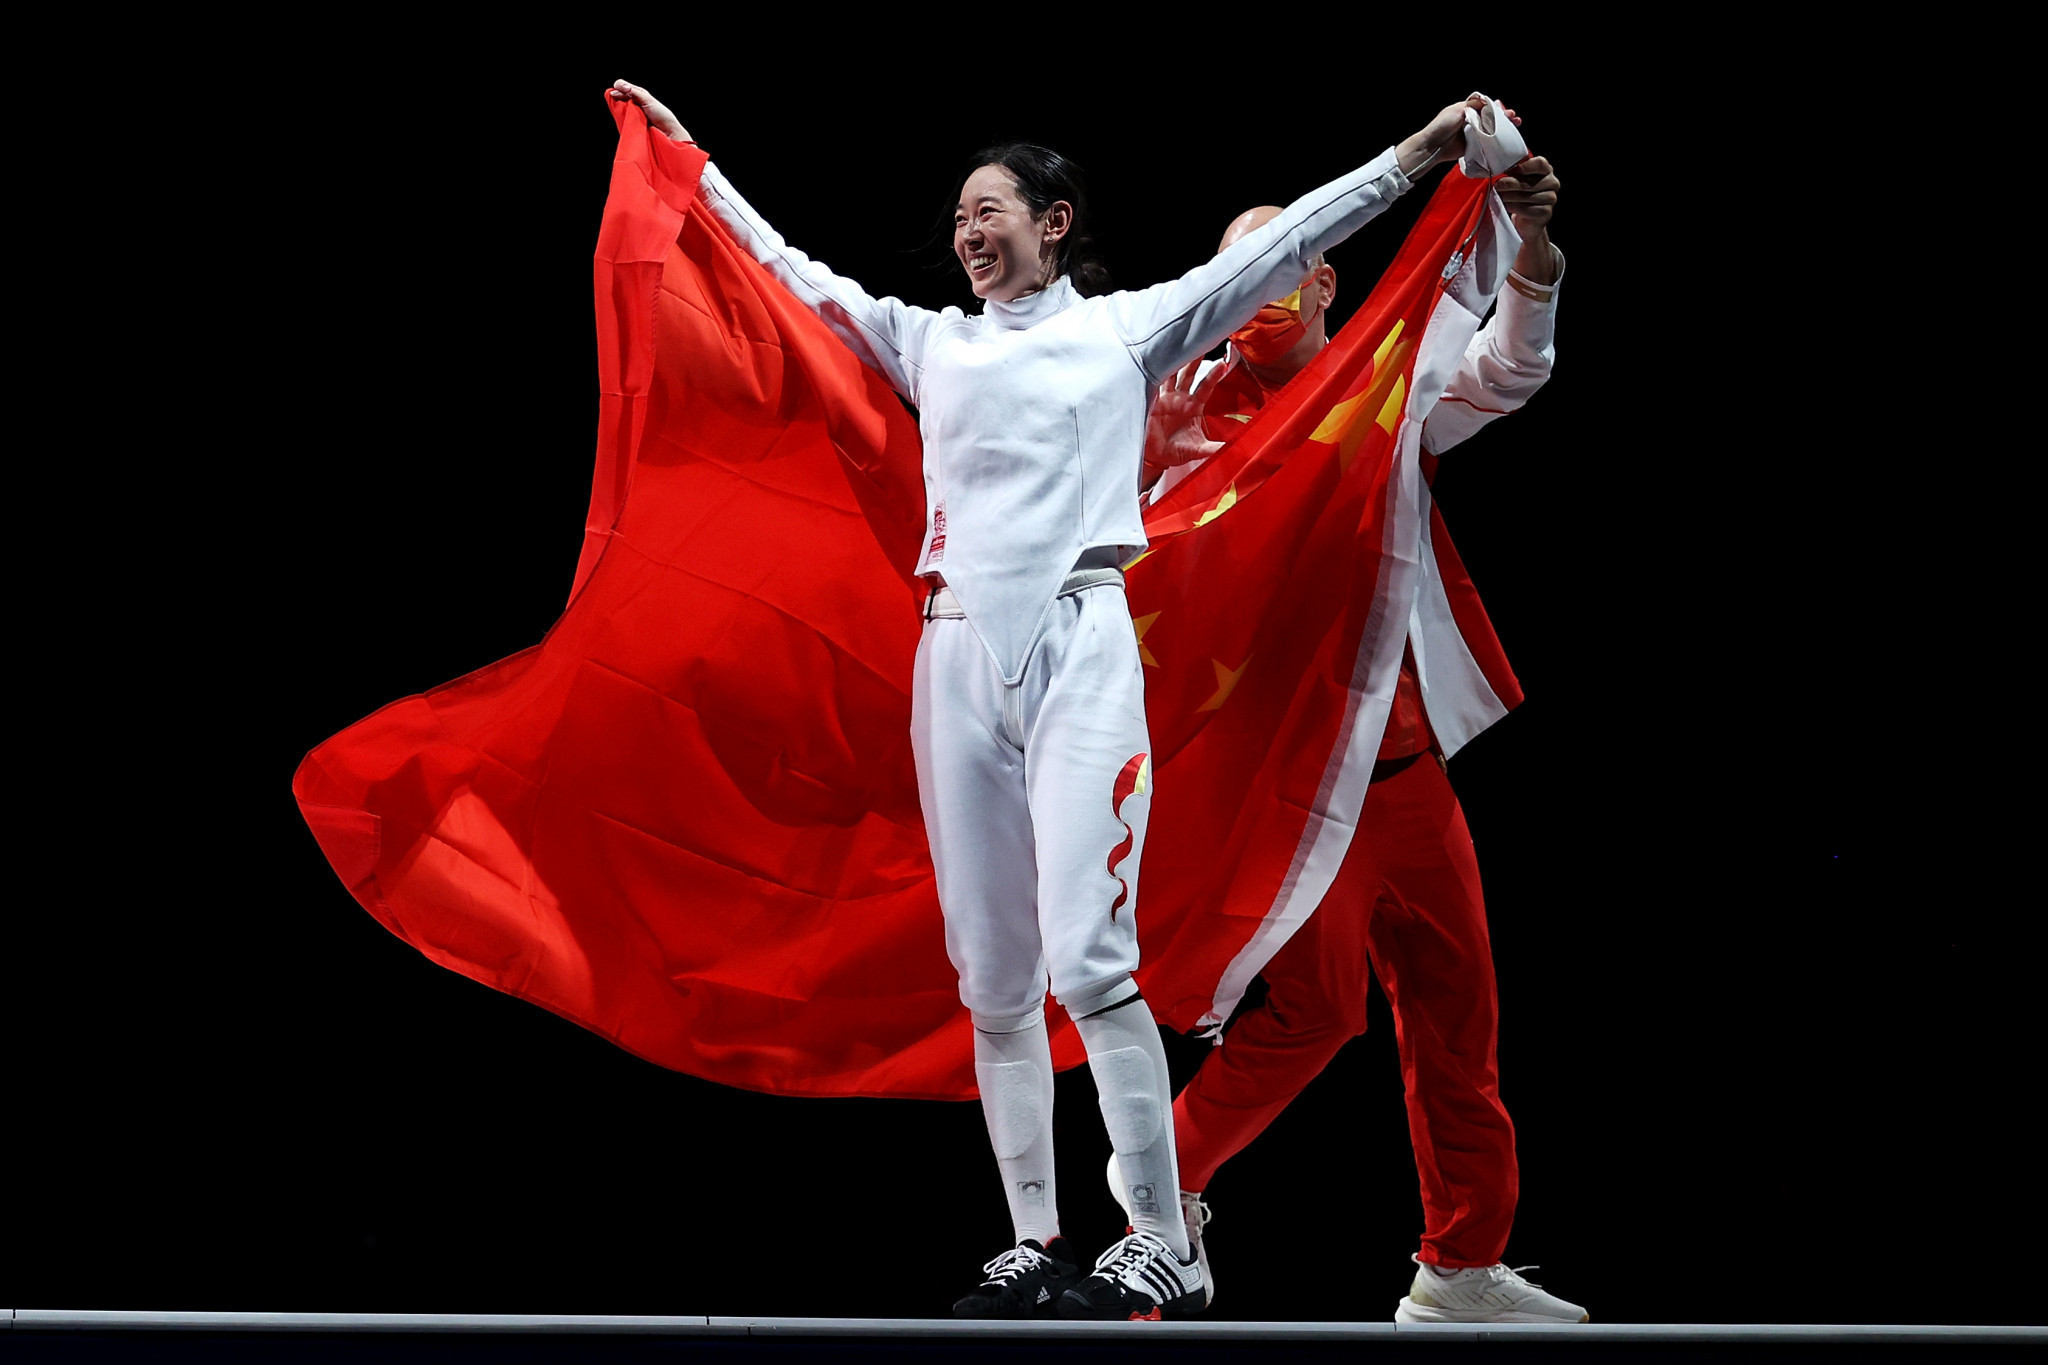 China's Olympic épée champion Sun Yiwen is returning to training after a lengthy injury lay-off following her Tokyo 2020 gold ©Getty Images